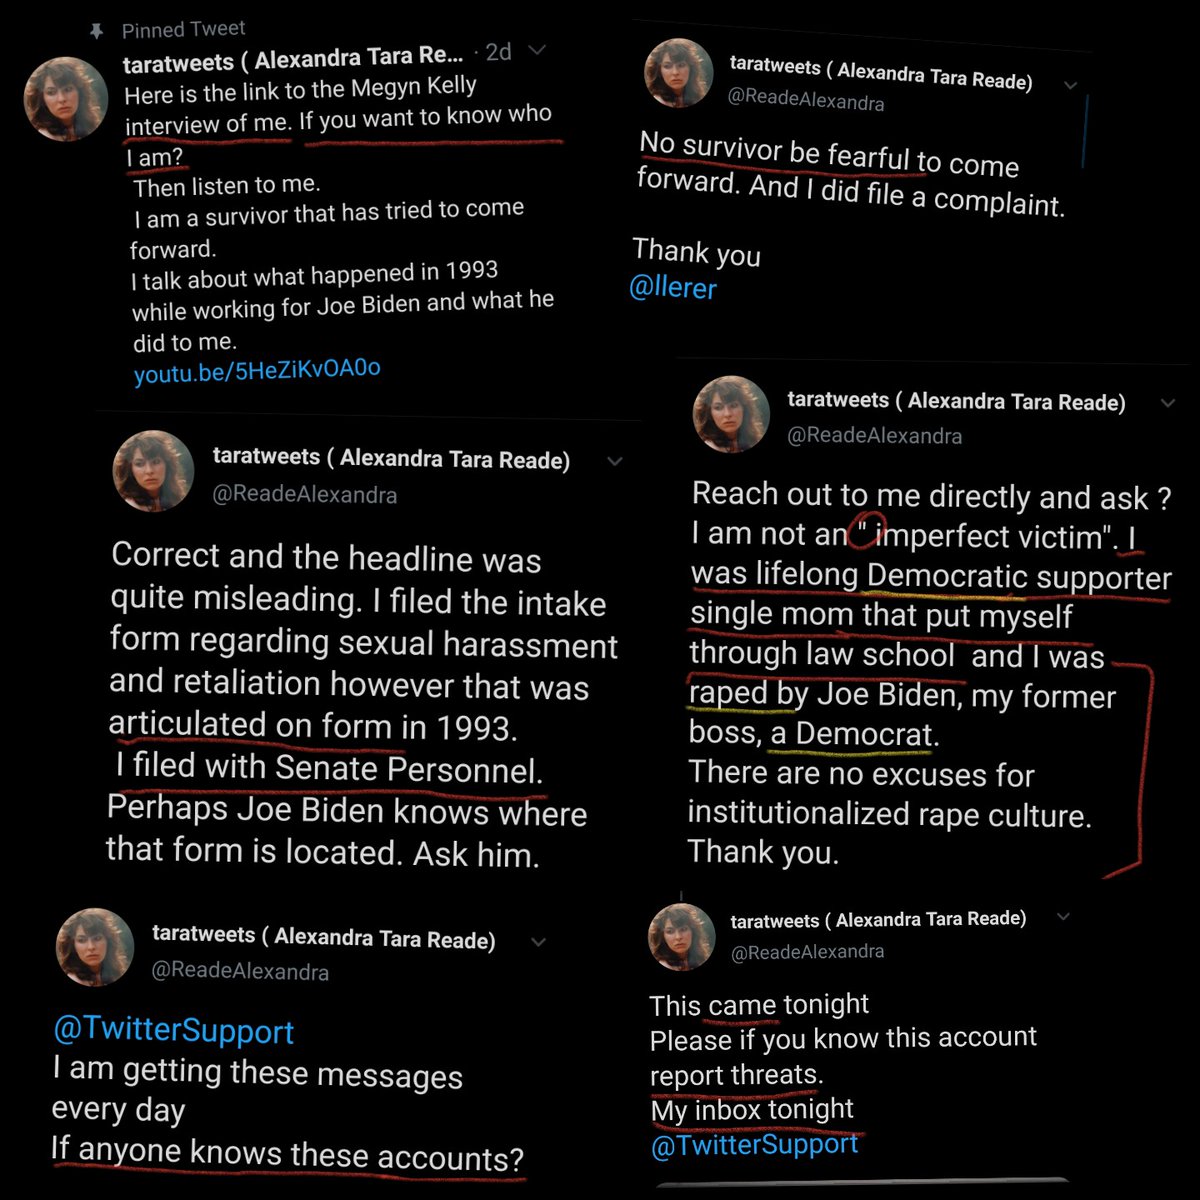 Here's an update with newer tweets from Tara's account (she hasn't tweet a whole lot since April).Who says "interview of me"??Or "this came tonight" in reference to a DM? Most people would say "received this" or "got this" or "this showed up".Still so weird!